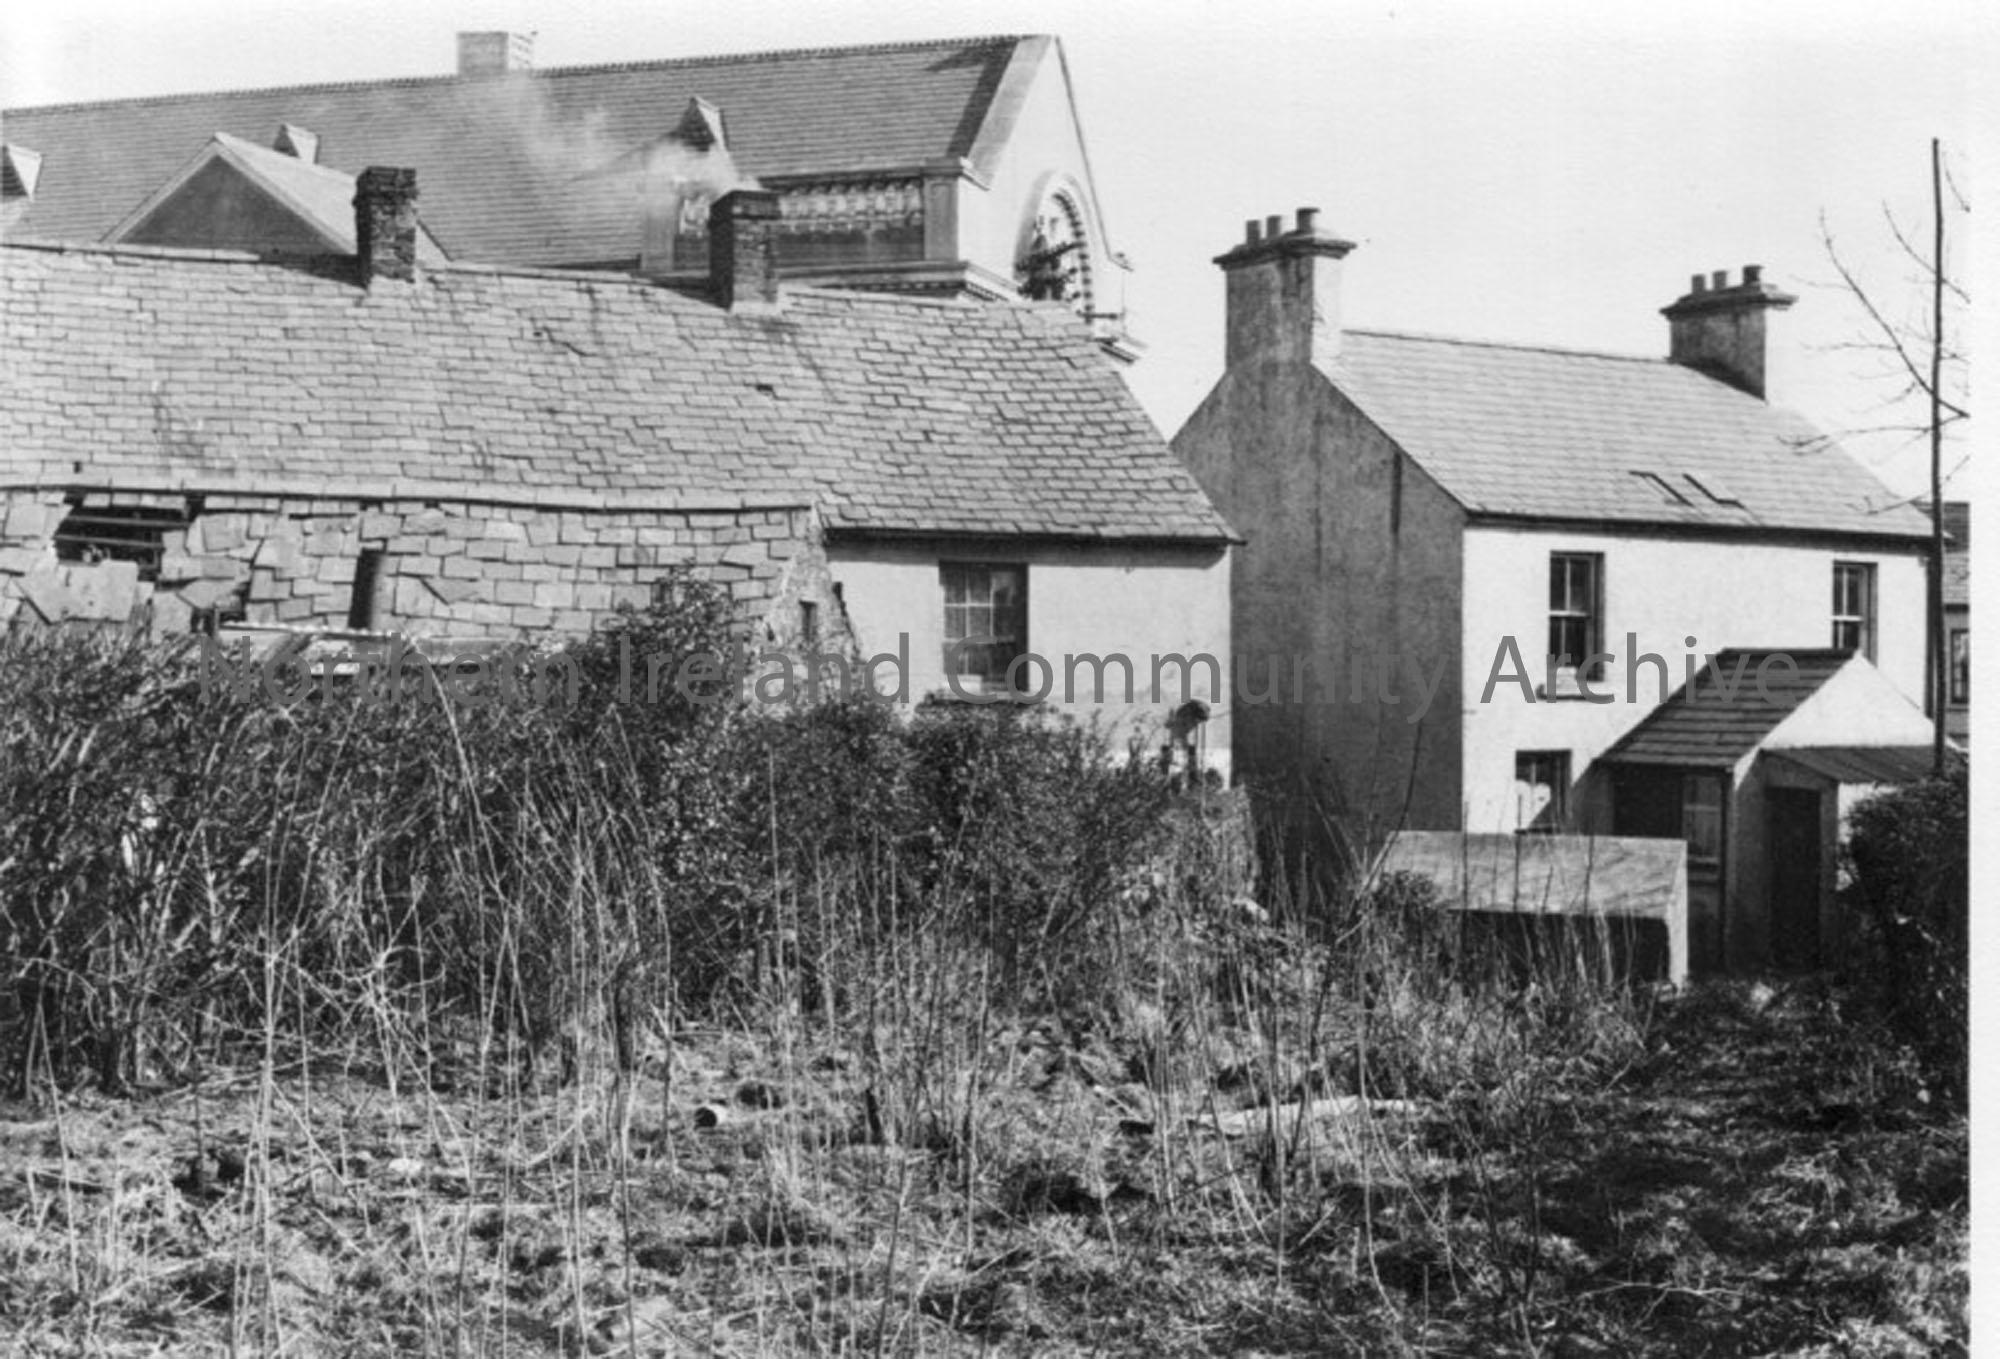 black and white photographs depicting terraced houese, backyards, carparks, come scenes of dilapidation C. 1950’s. Handwritten note included indicates…